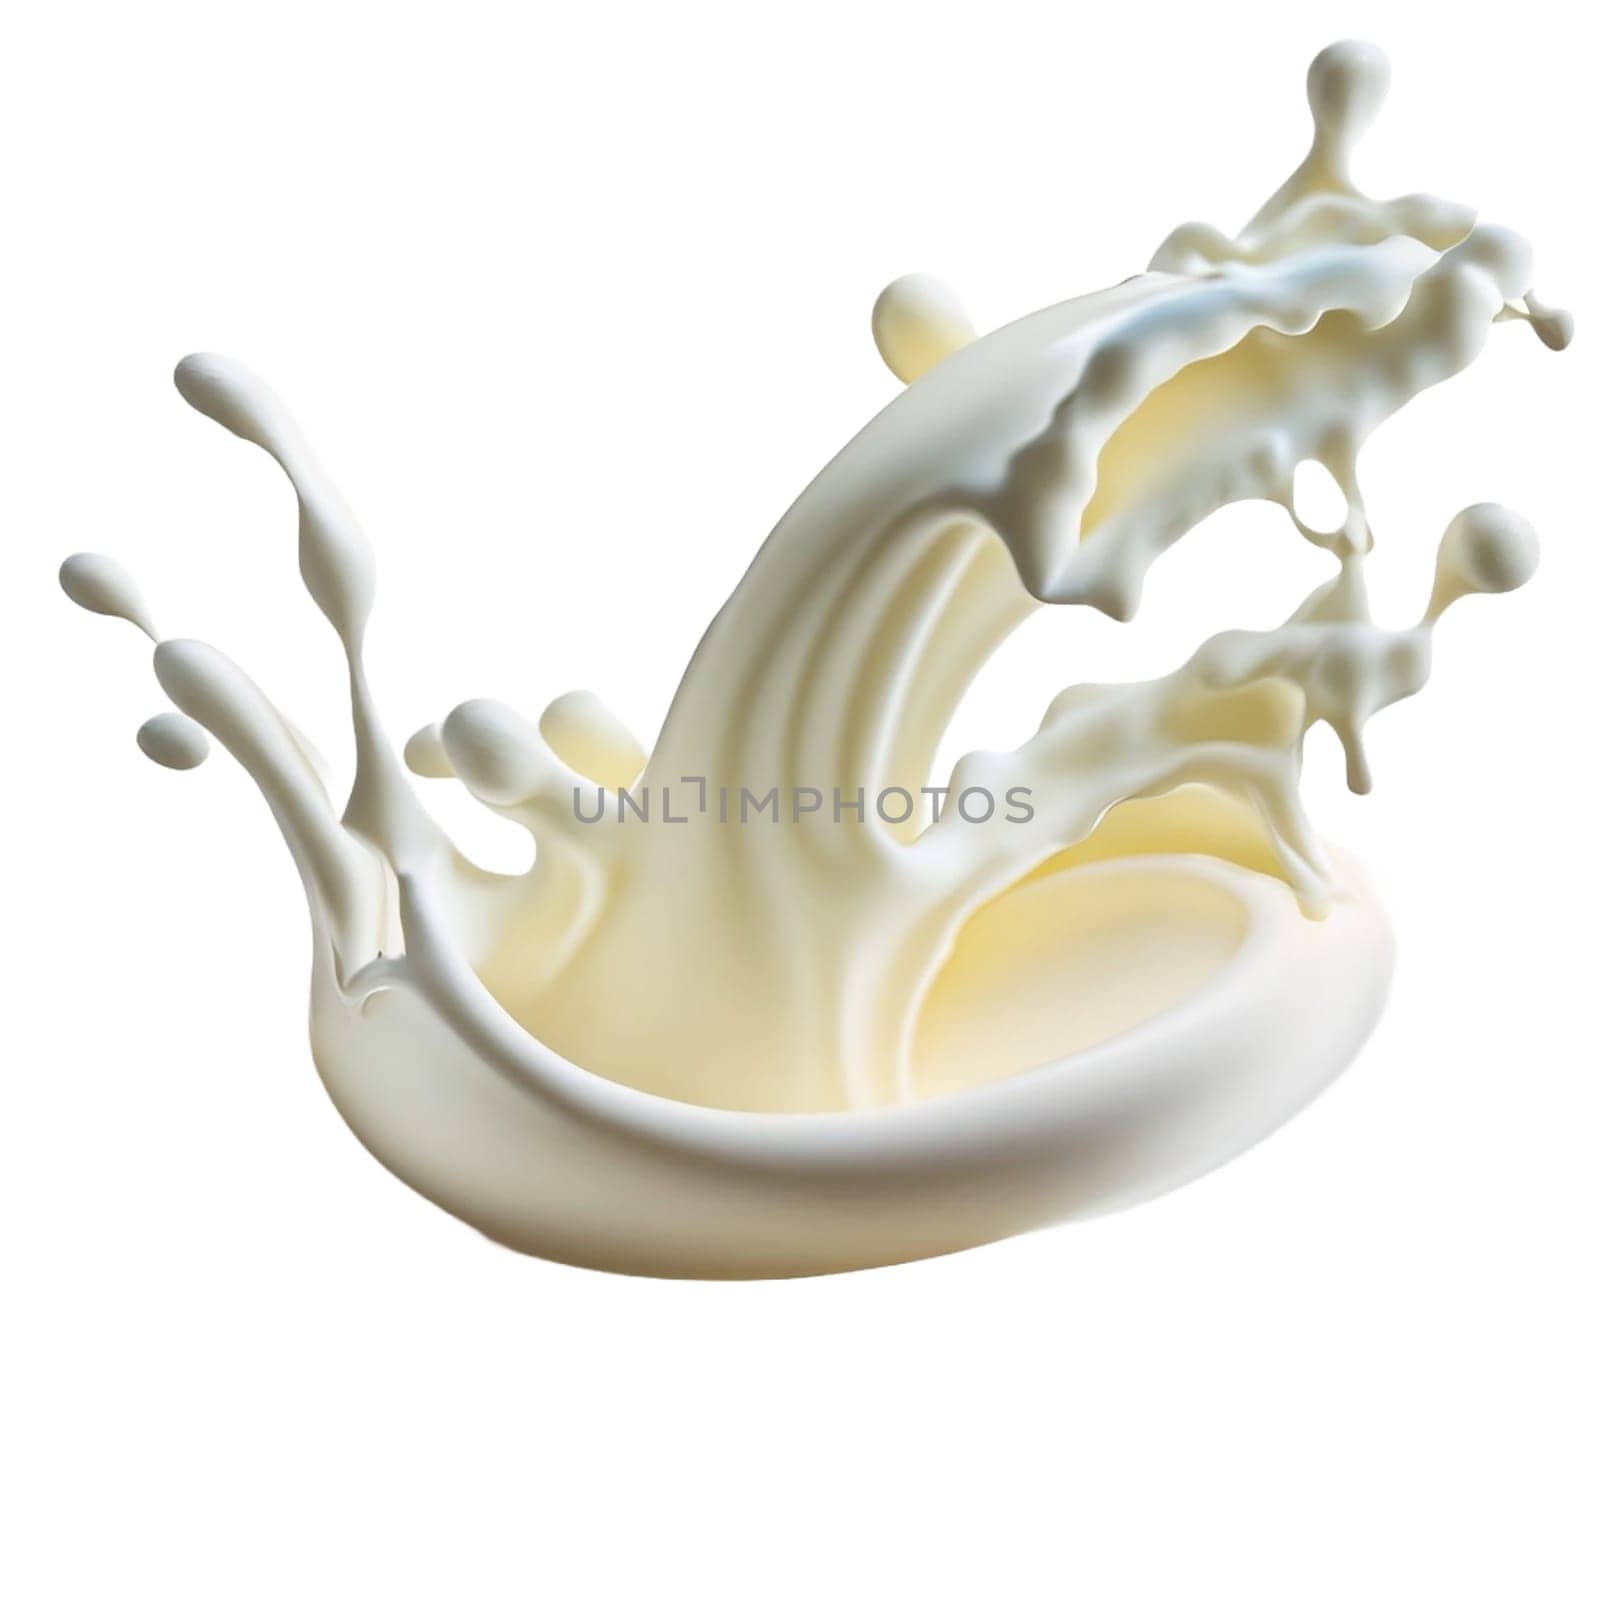 Pouring milk splash isolated on white background. Splash of milk or cream isolated on white background With clipping path. High quality image